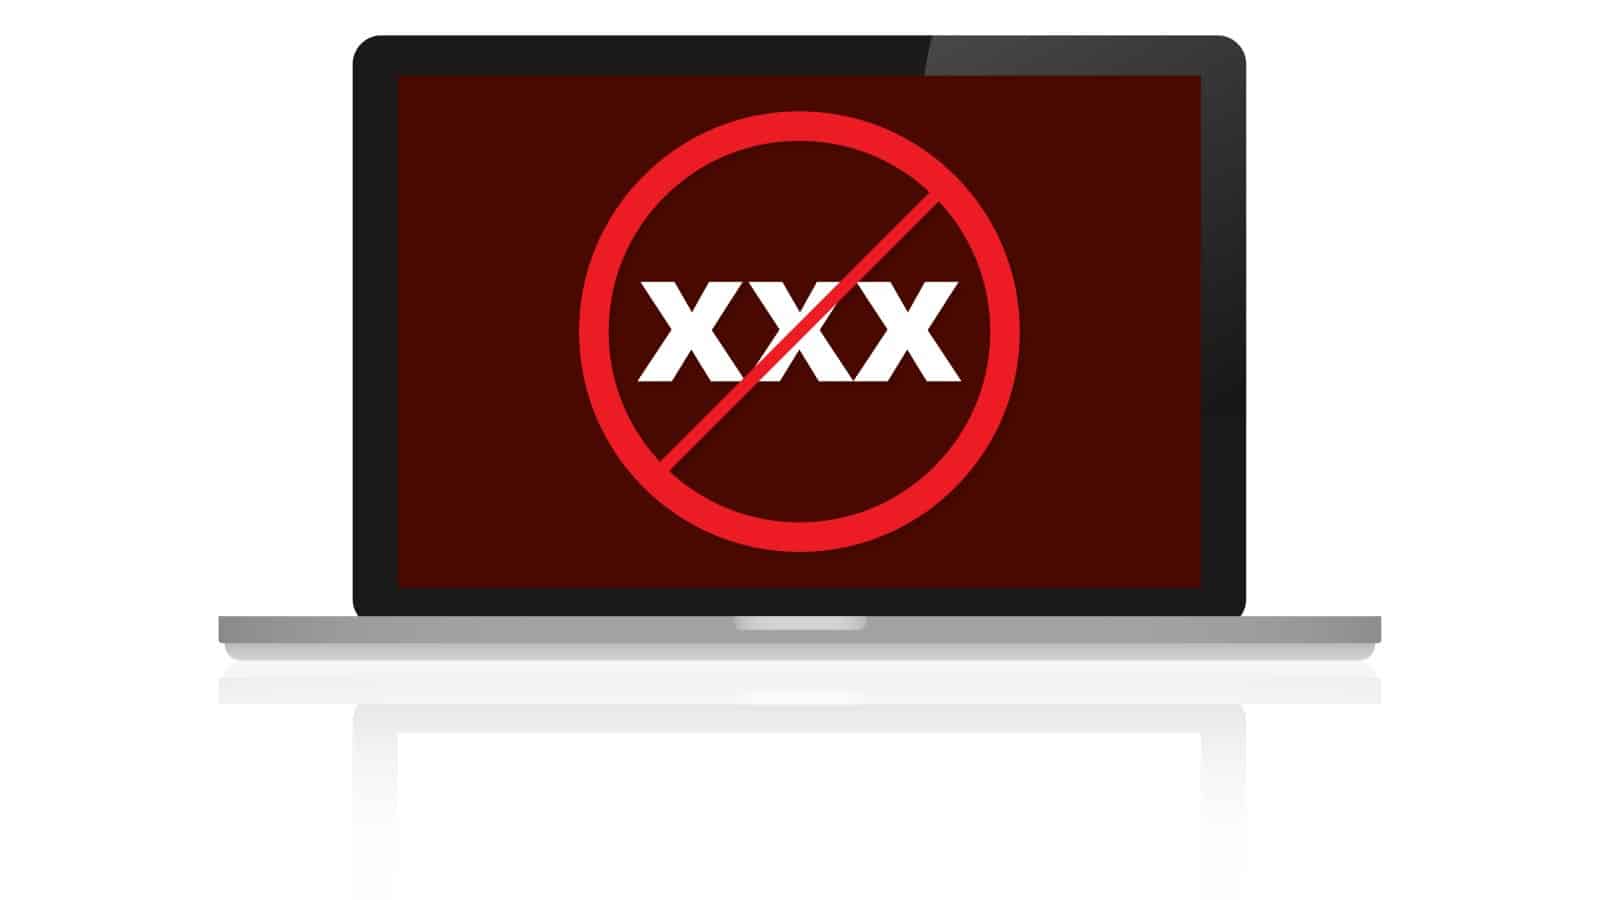 An image of a laptop with a no porn sign, representing the India and China bans on explicit content.